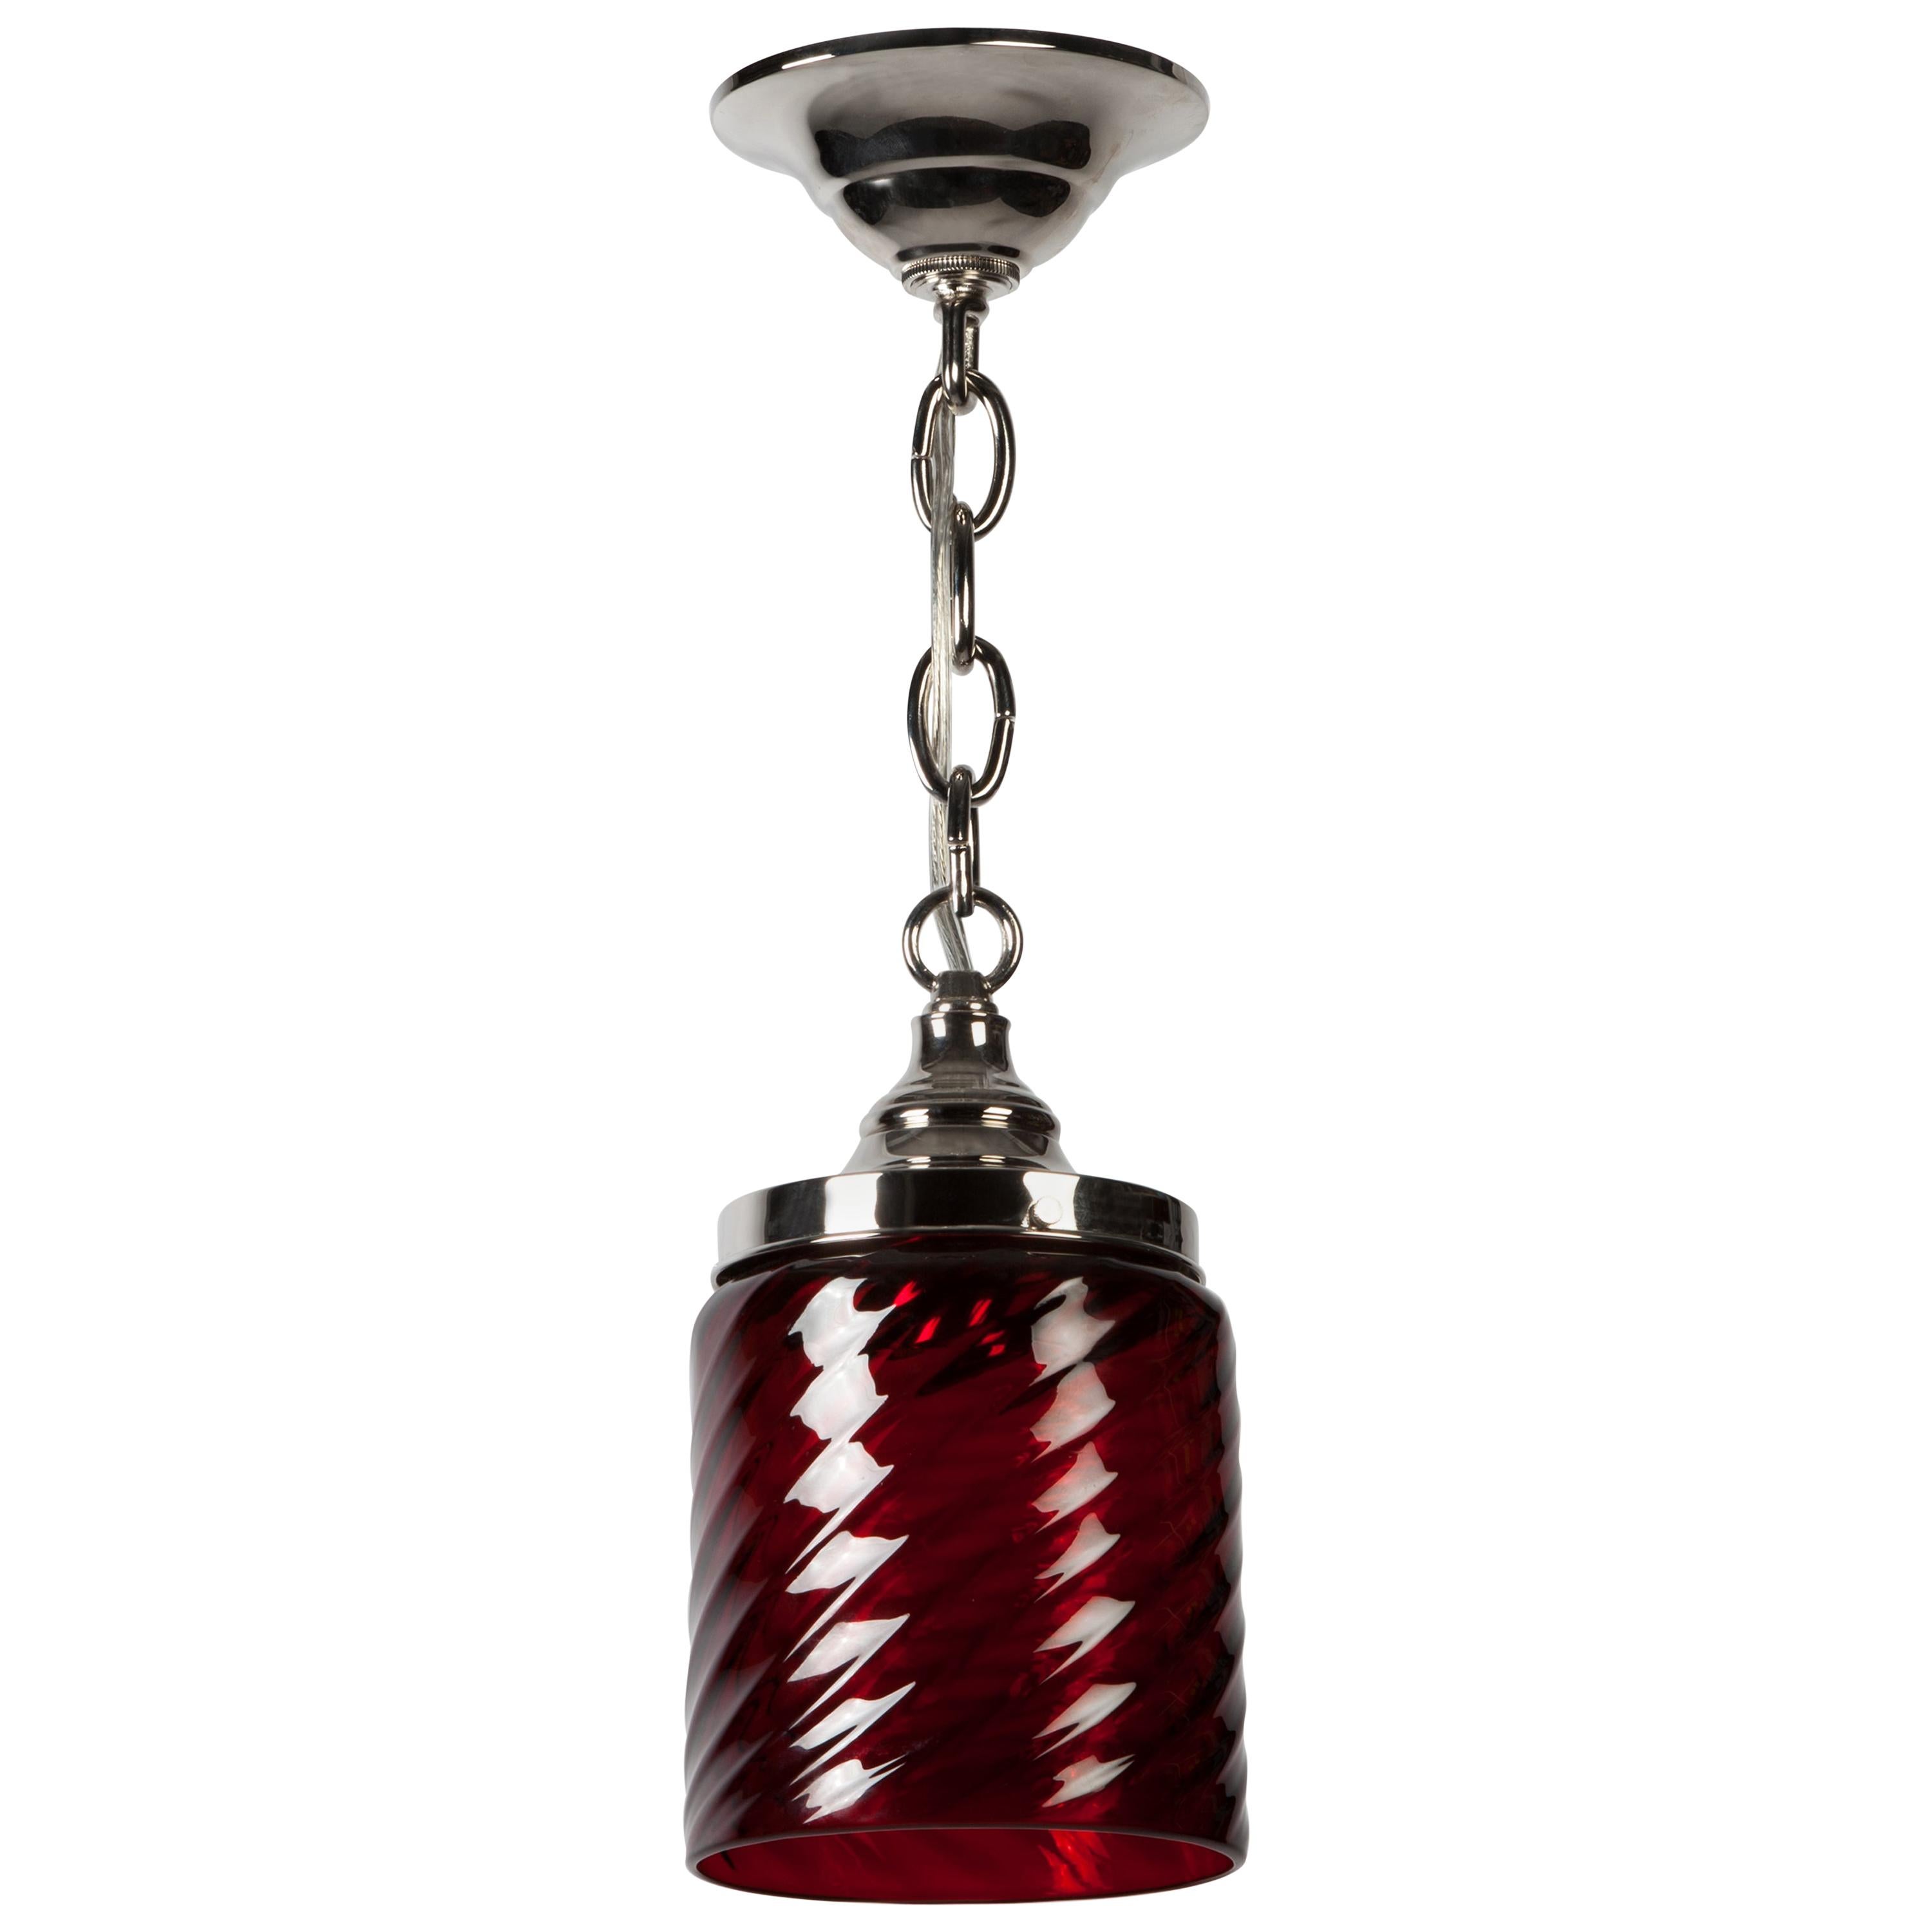 AHL3838
An antique hand blown, swirl patterned, red glass pendant on polished nickel fittings made in the Remains Lighting Co. workshop. Due to the antique nature of this fixture, there may be some nicks or imperfections in the